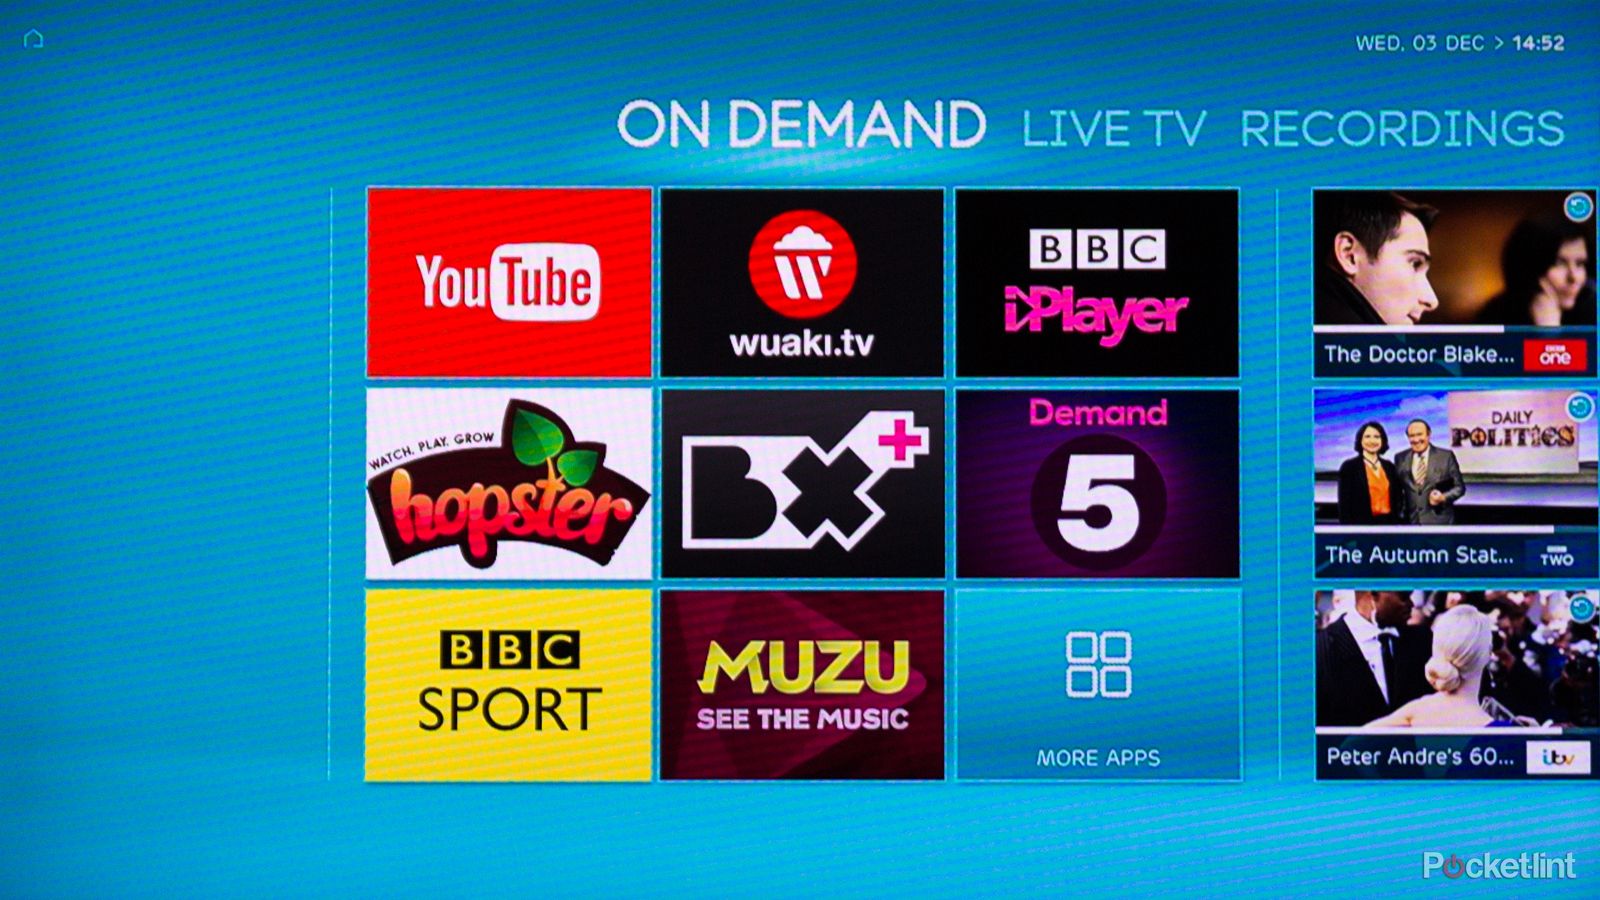 ee tv review image 6